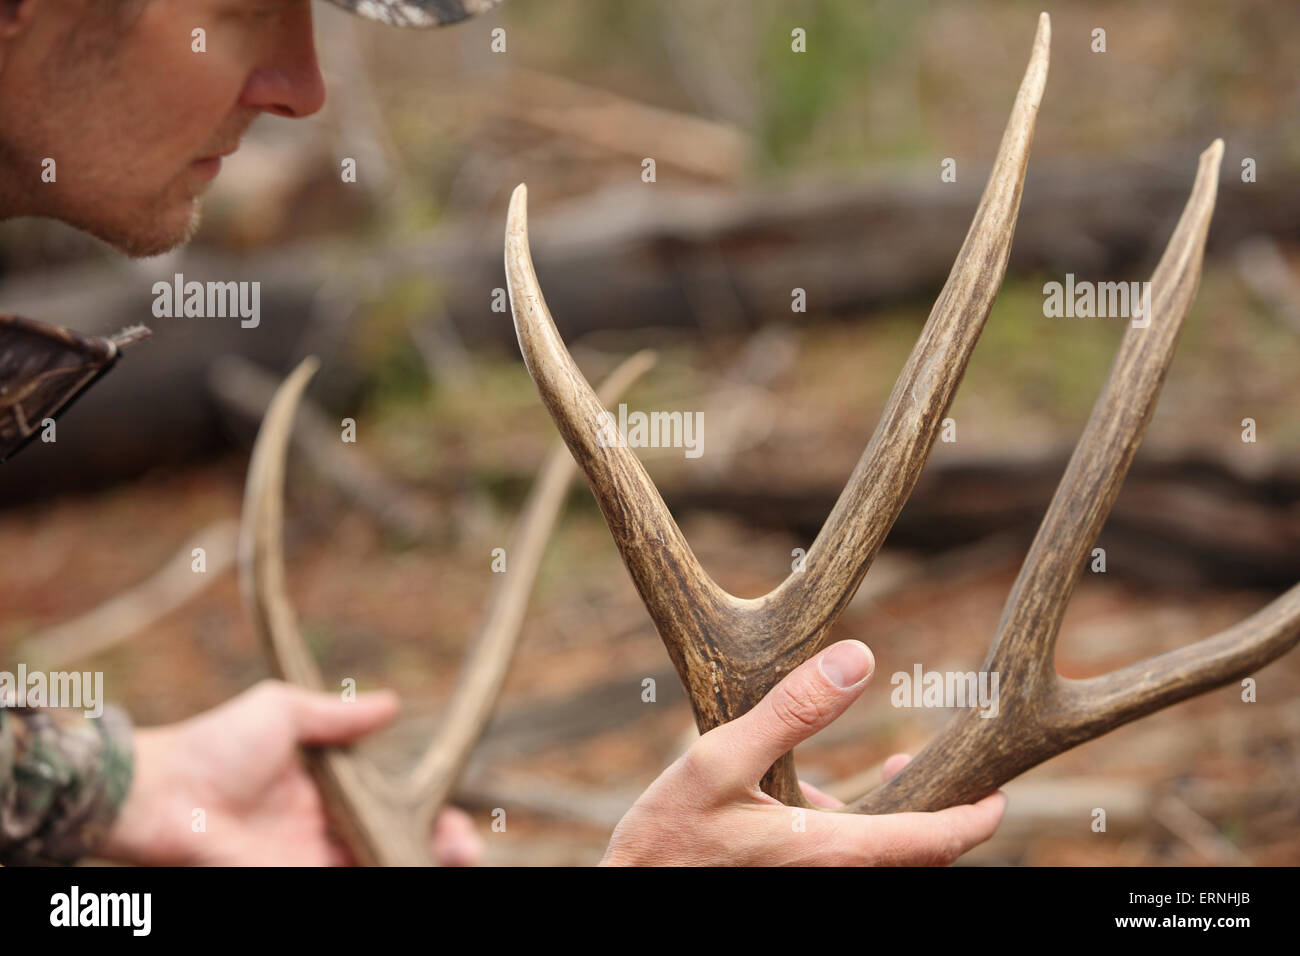 successful hunter inspecting harvested deer antlers close up Stock Photo